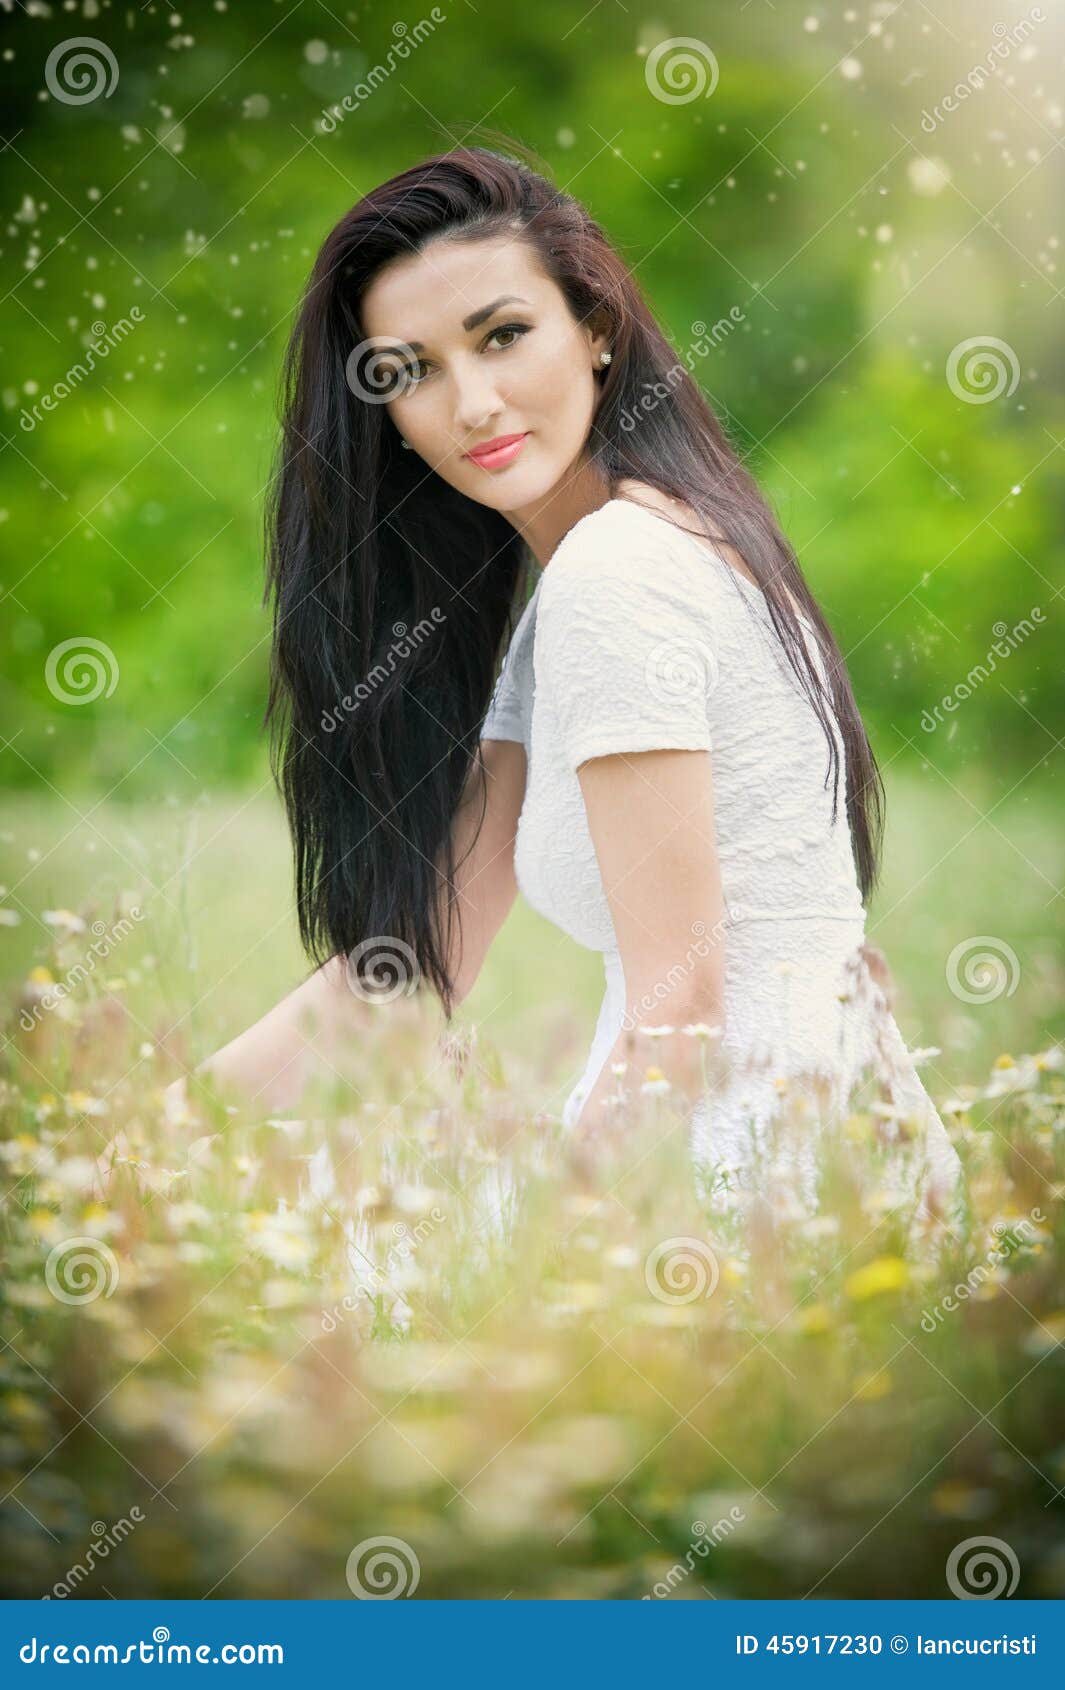 711,383 Beautiful Hair Nature - Free & Royalty-Free Stock Photos from Dreamstime